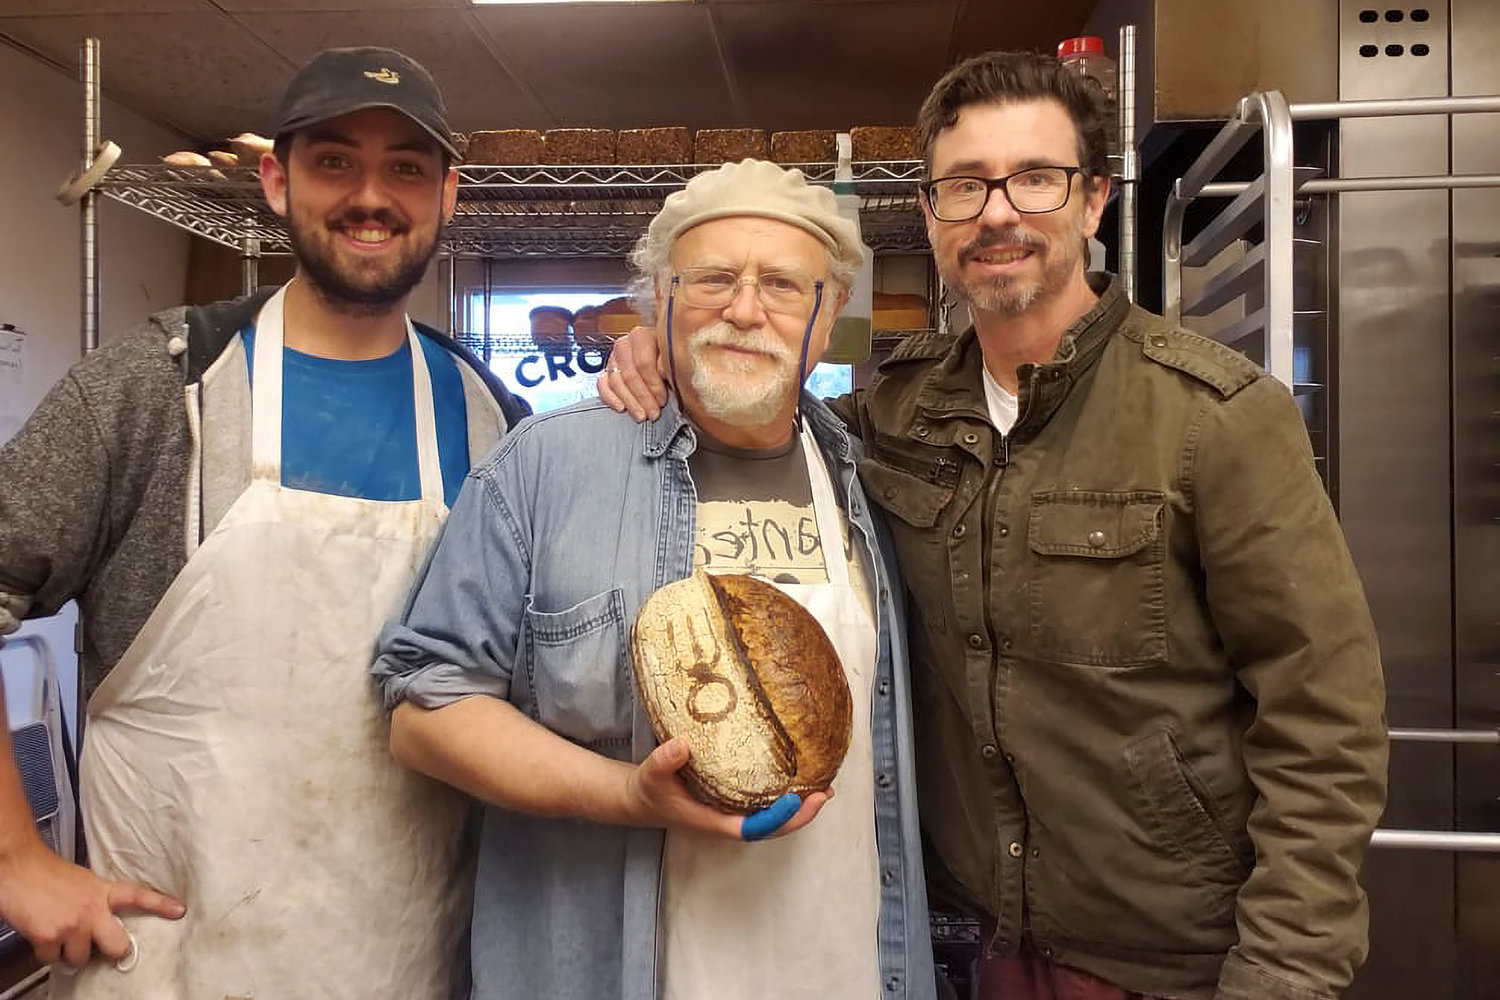 Arnie Adler honed his craft as a bread baker when he apprenticed at Bob’s Well Bread Bakery in California early last month. There Adler became more confident as a baker, learning how make baguettes and even croissants for the first time.